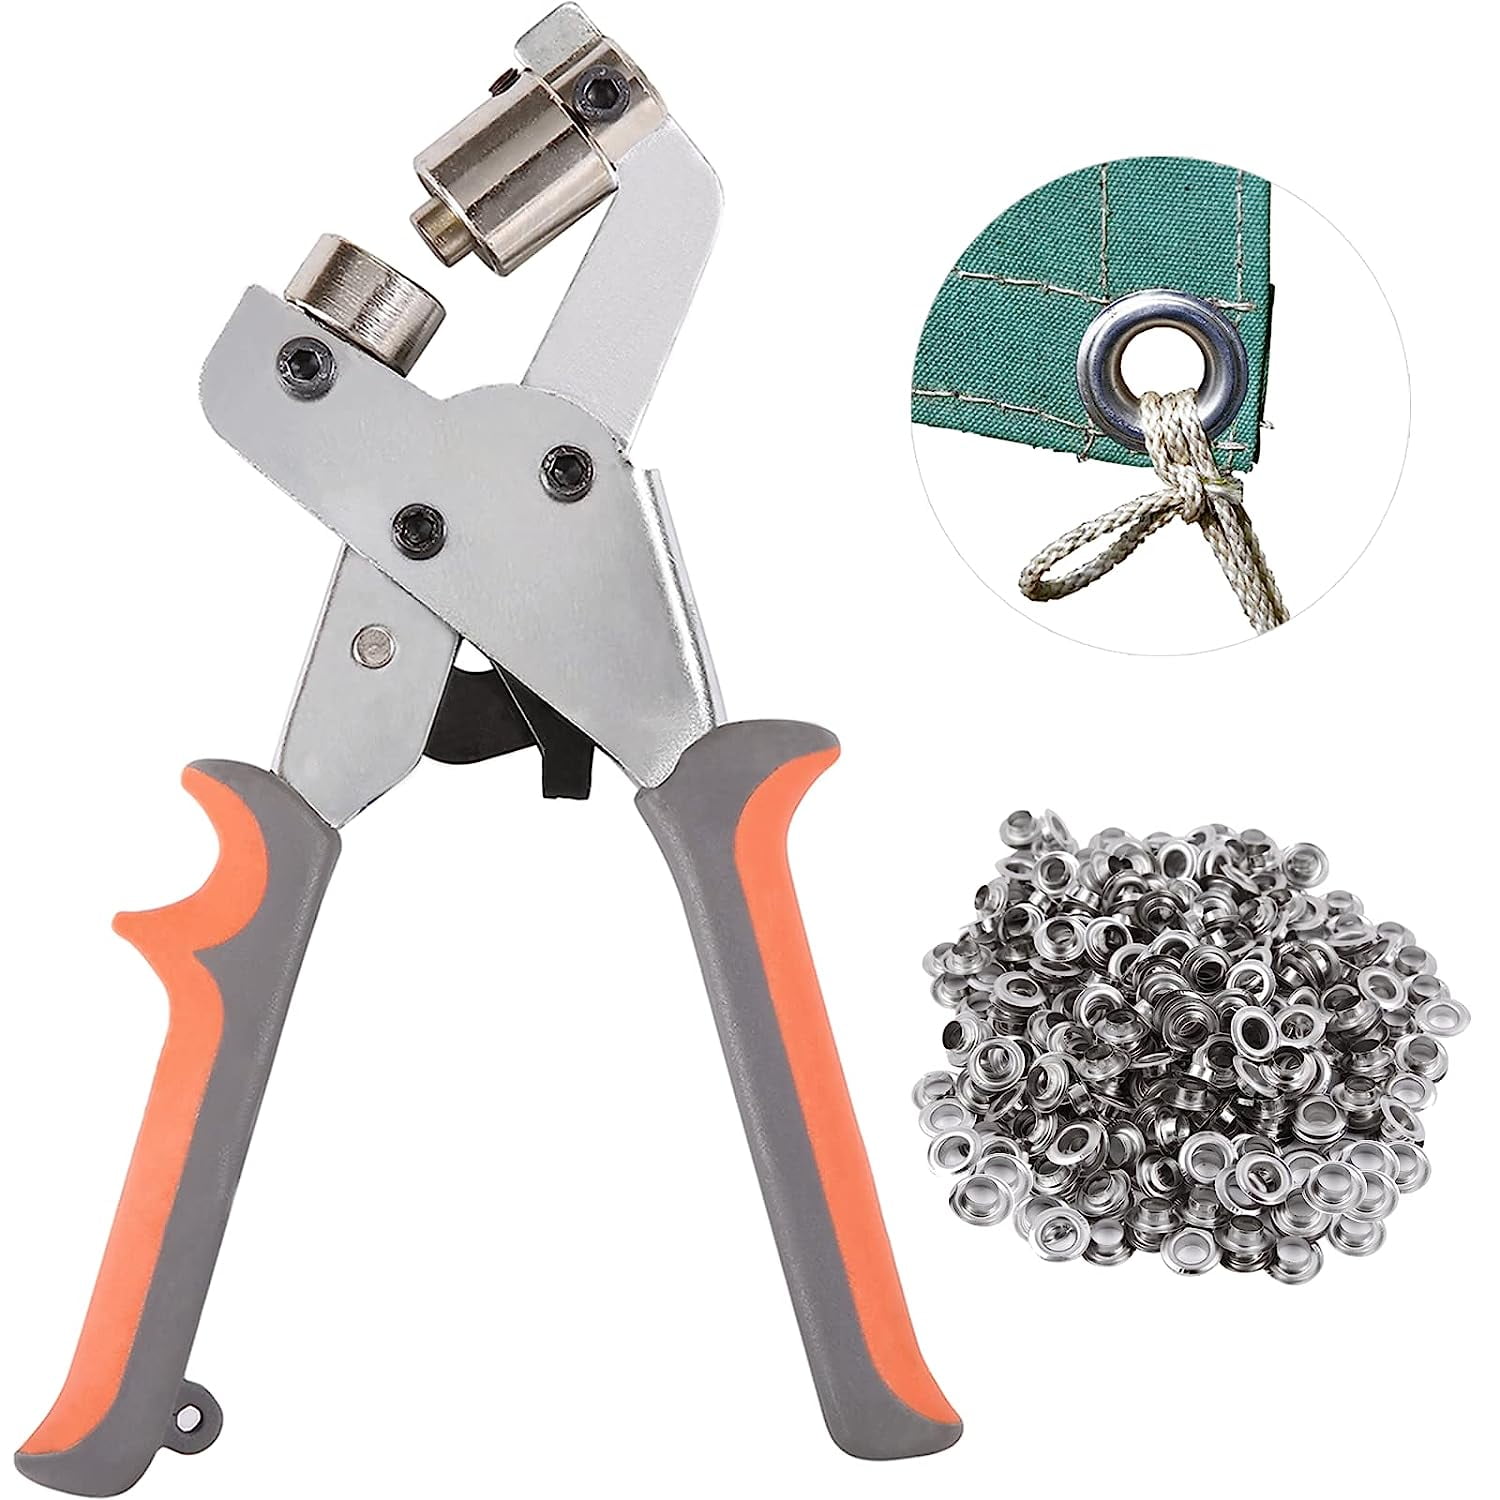 Grommet Tool Kit, 3/8 Inch Eyelet Kit Press Pliers (10mm) Punch Hole Maker  Manual Handheld Machine with 500pcs Silver Grommets